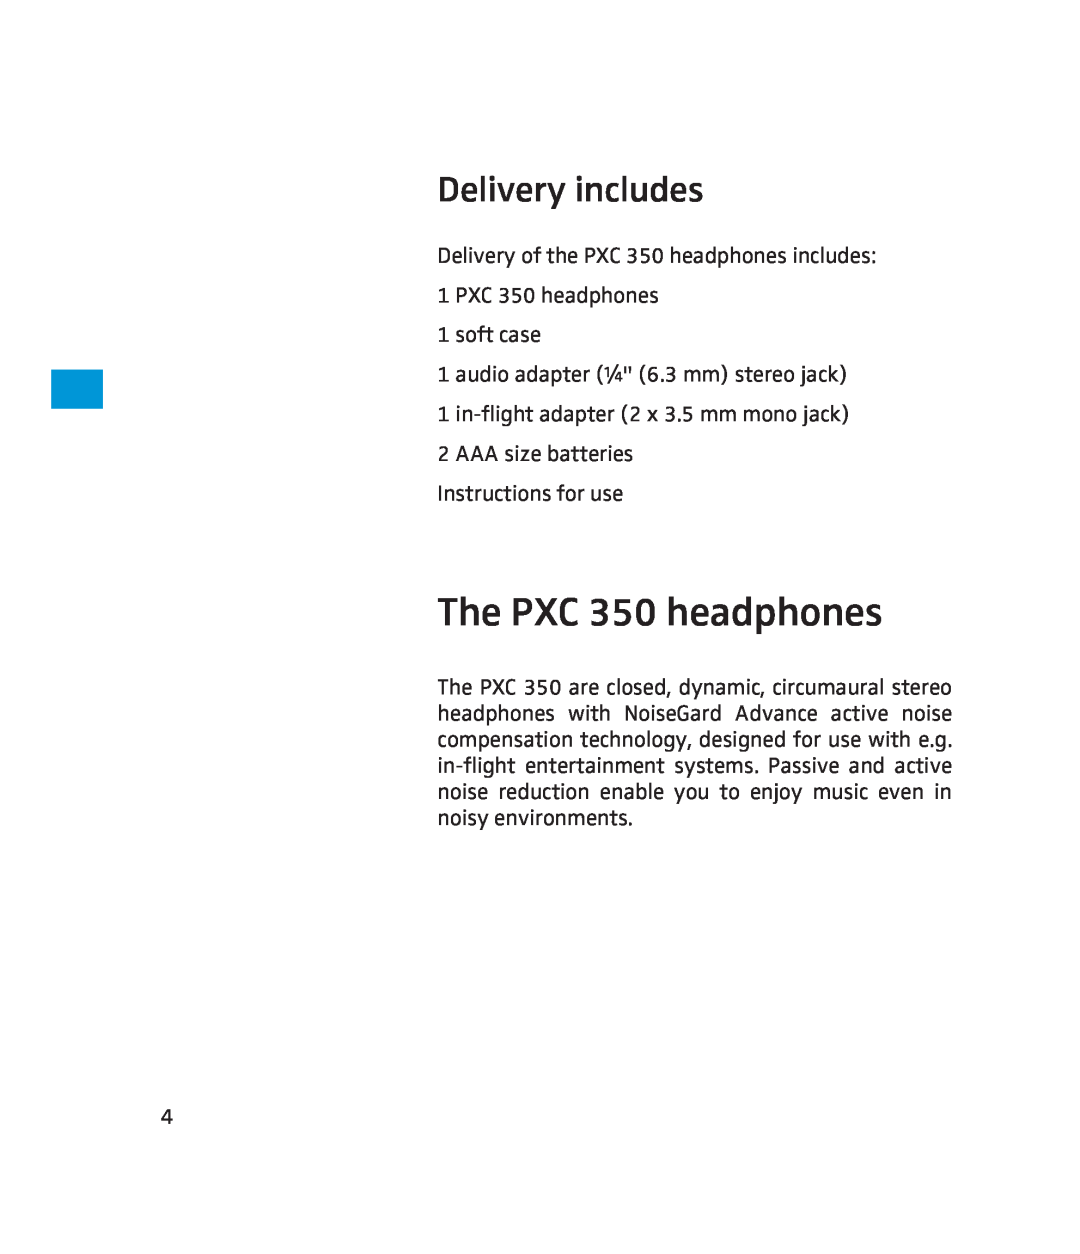 Sennheiser instruction manual The PXC 350 headphones, Delivery includes 